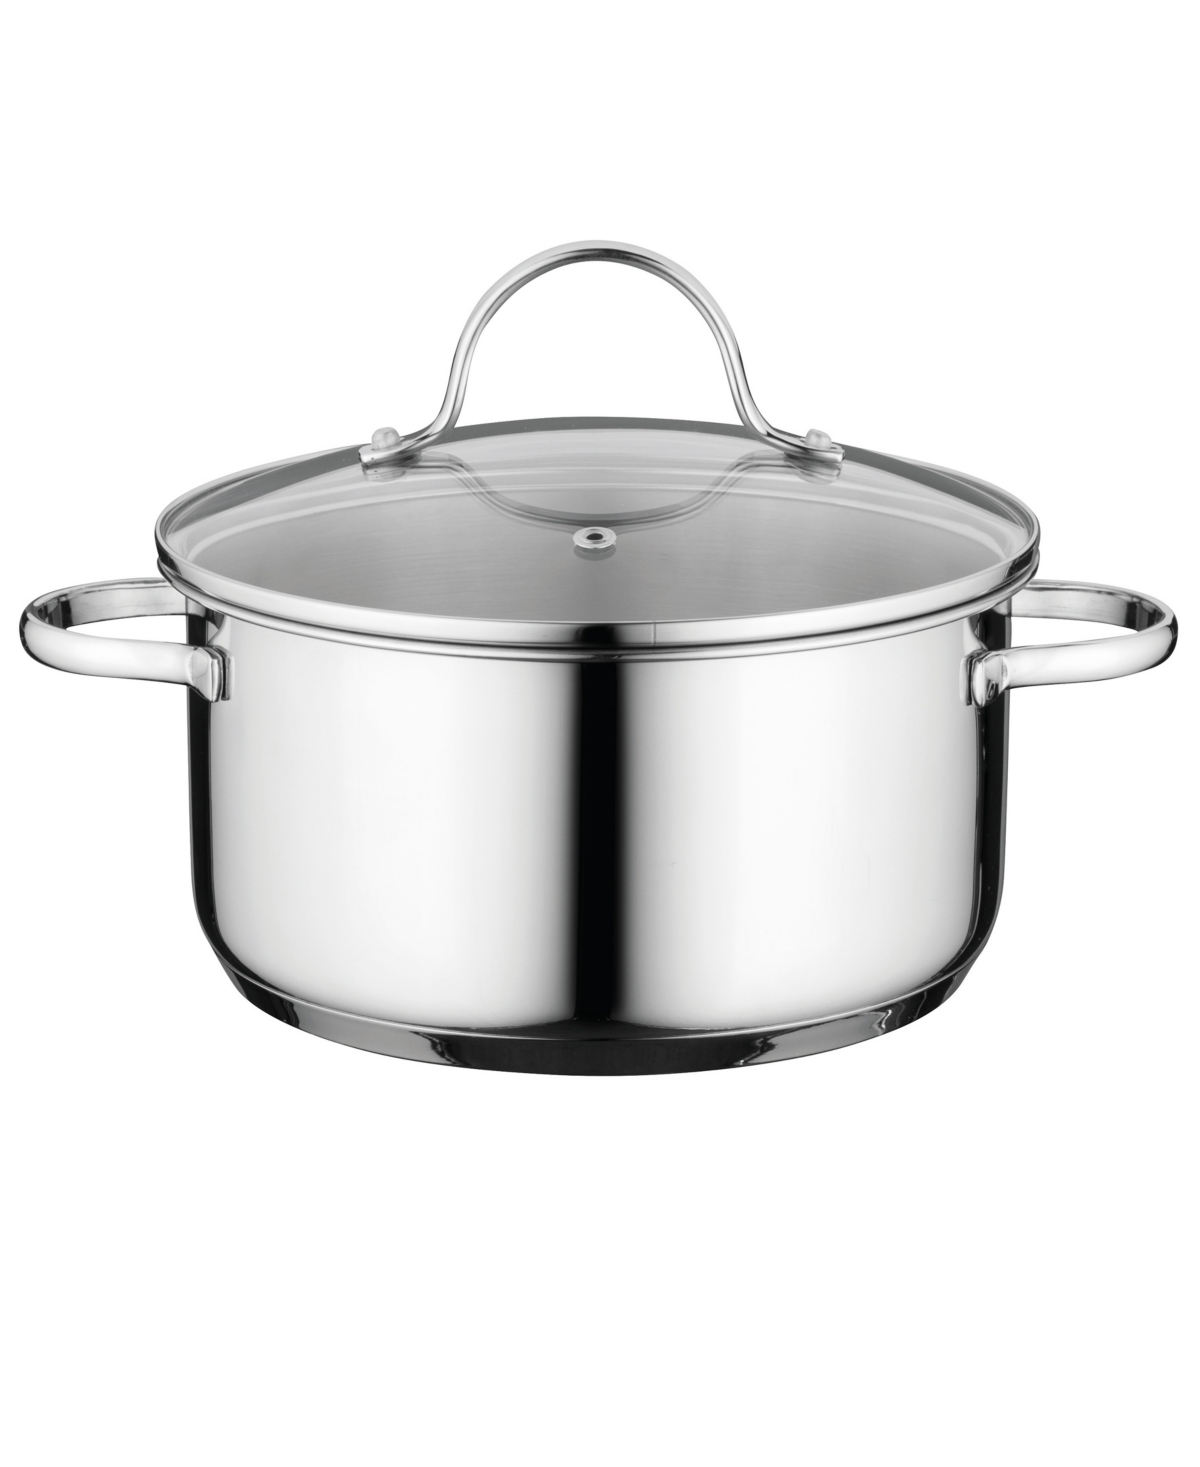 BergHOFF Comfort Stainless Steel 7 Covered Casserole